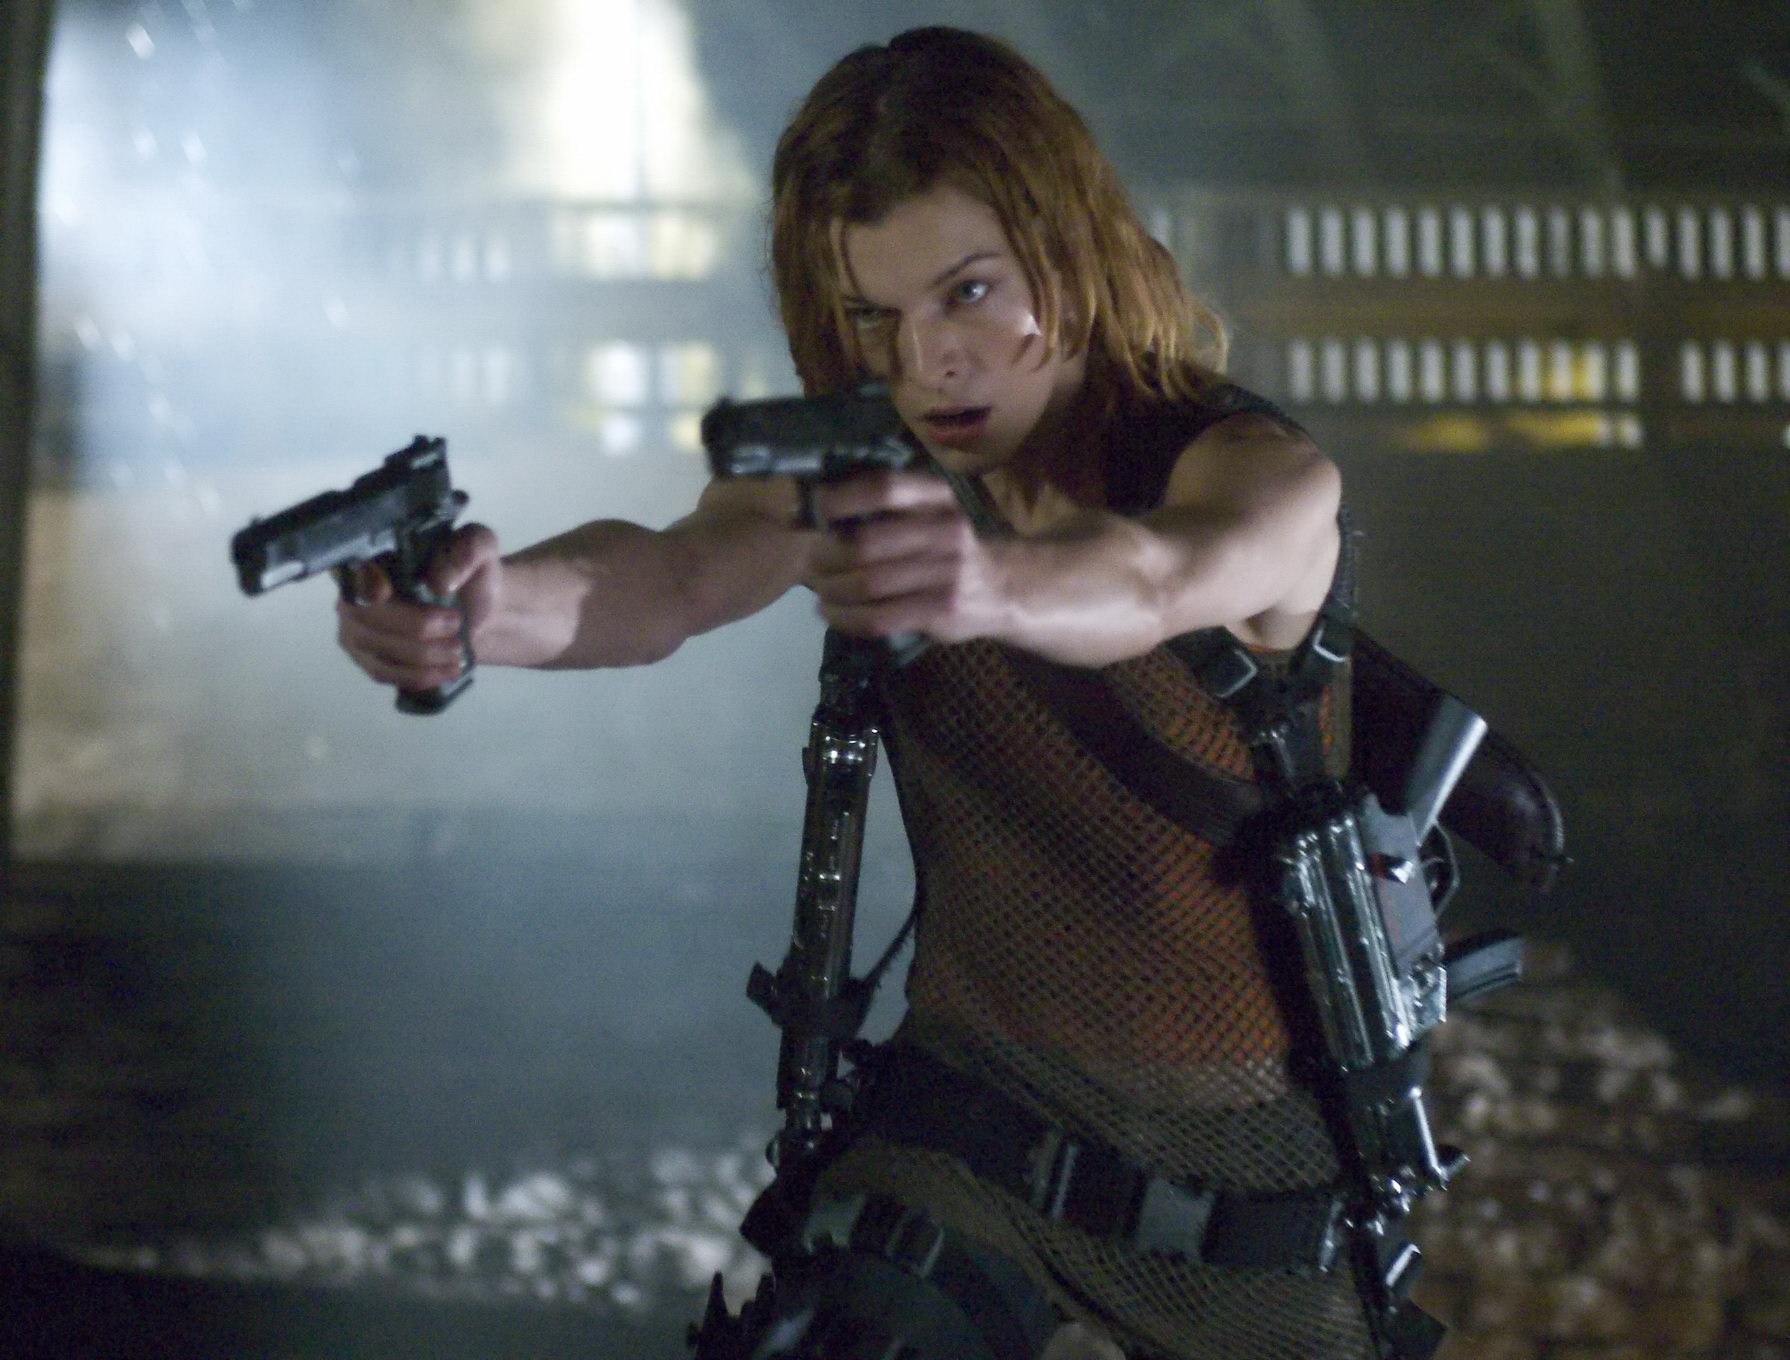 Milla Jovovich looking hot  armed to the teeth in the 'Resident Evil: Apocalypse #75233226